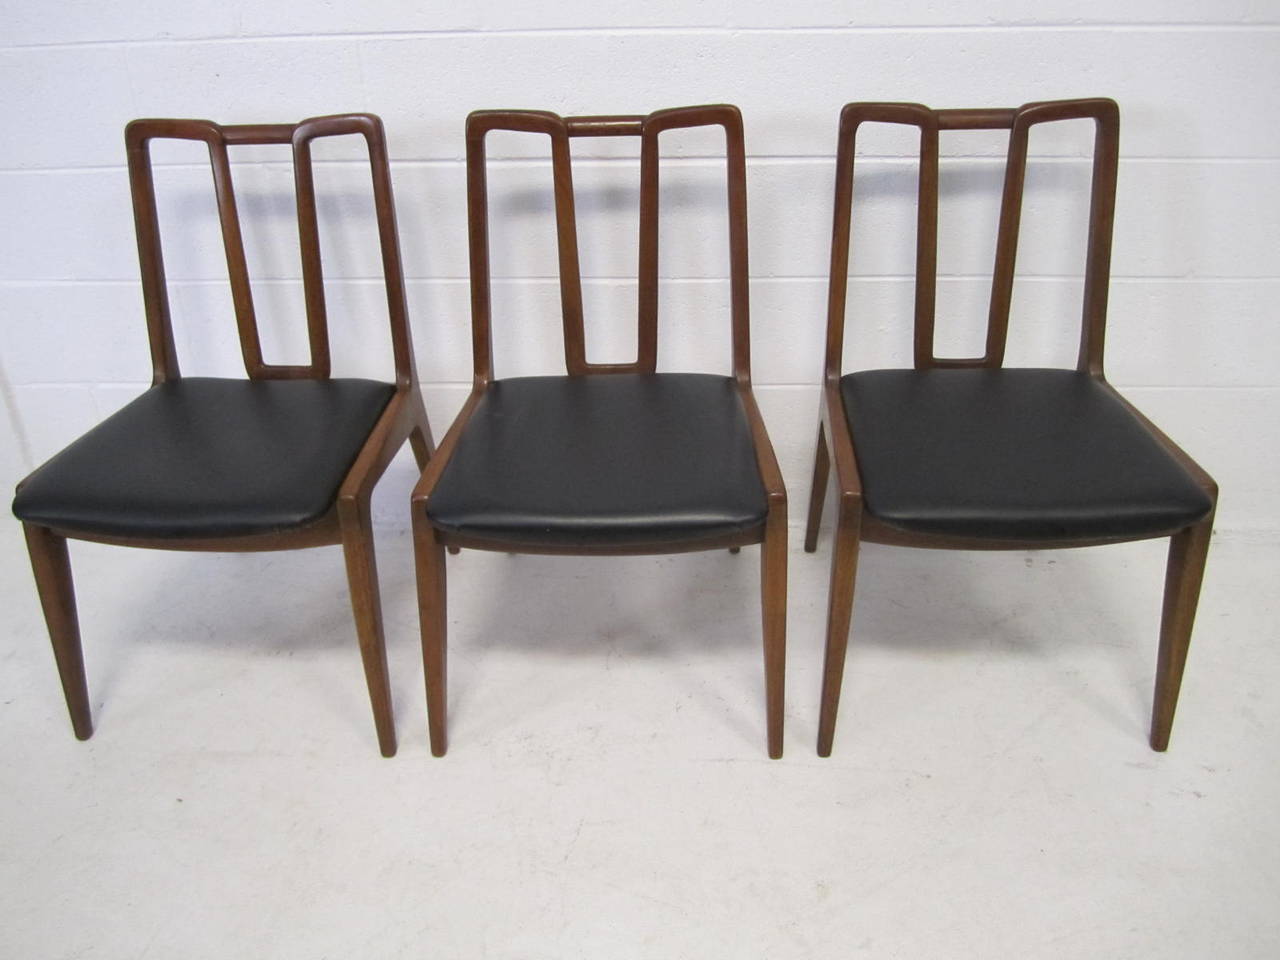 Handsome set of 5 John Stuart walnut dining chairs.  This well crafted set consists of 2 arm chairs and 3 side chairs.  The seat seats pads have newer faux black leather and look great.  We love the large scale of the arm chairs.